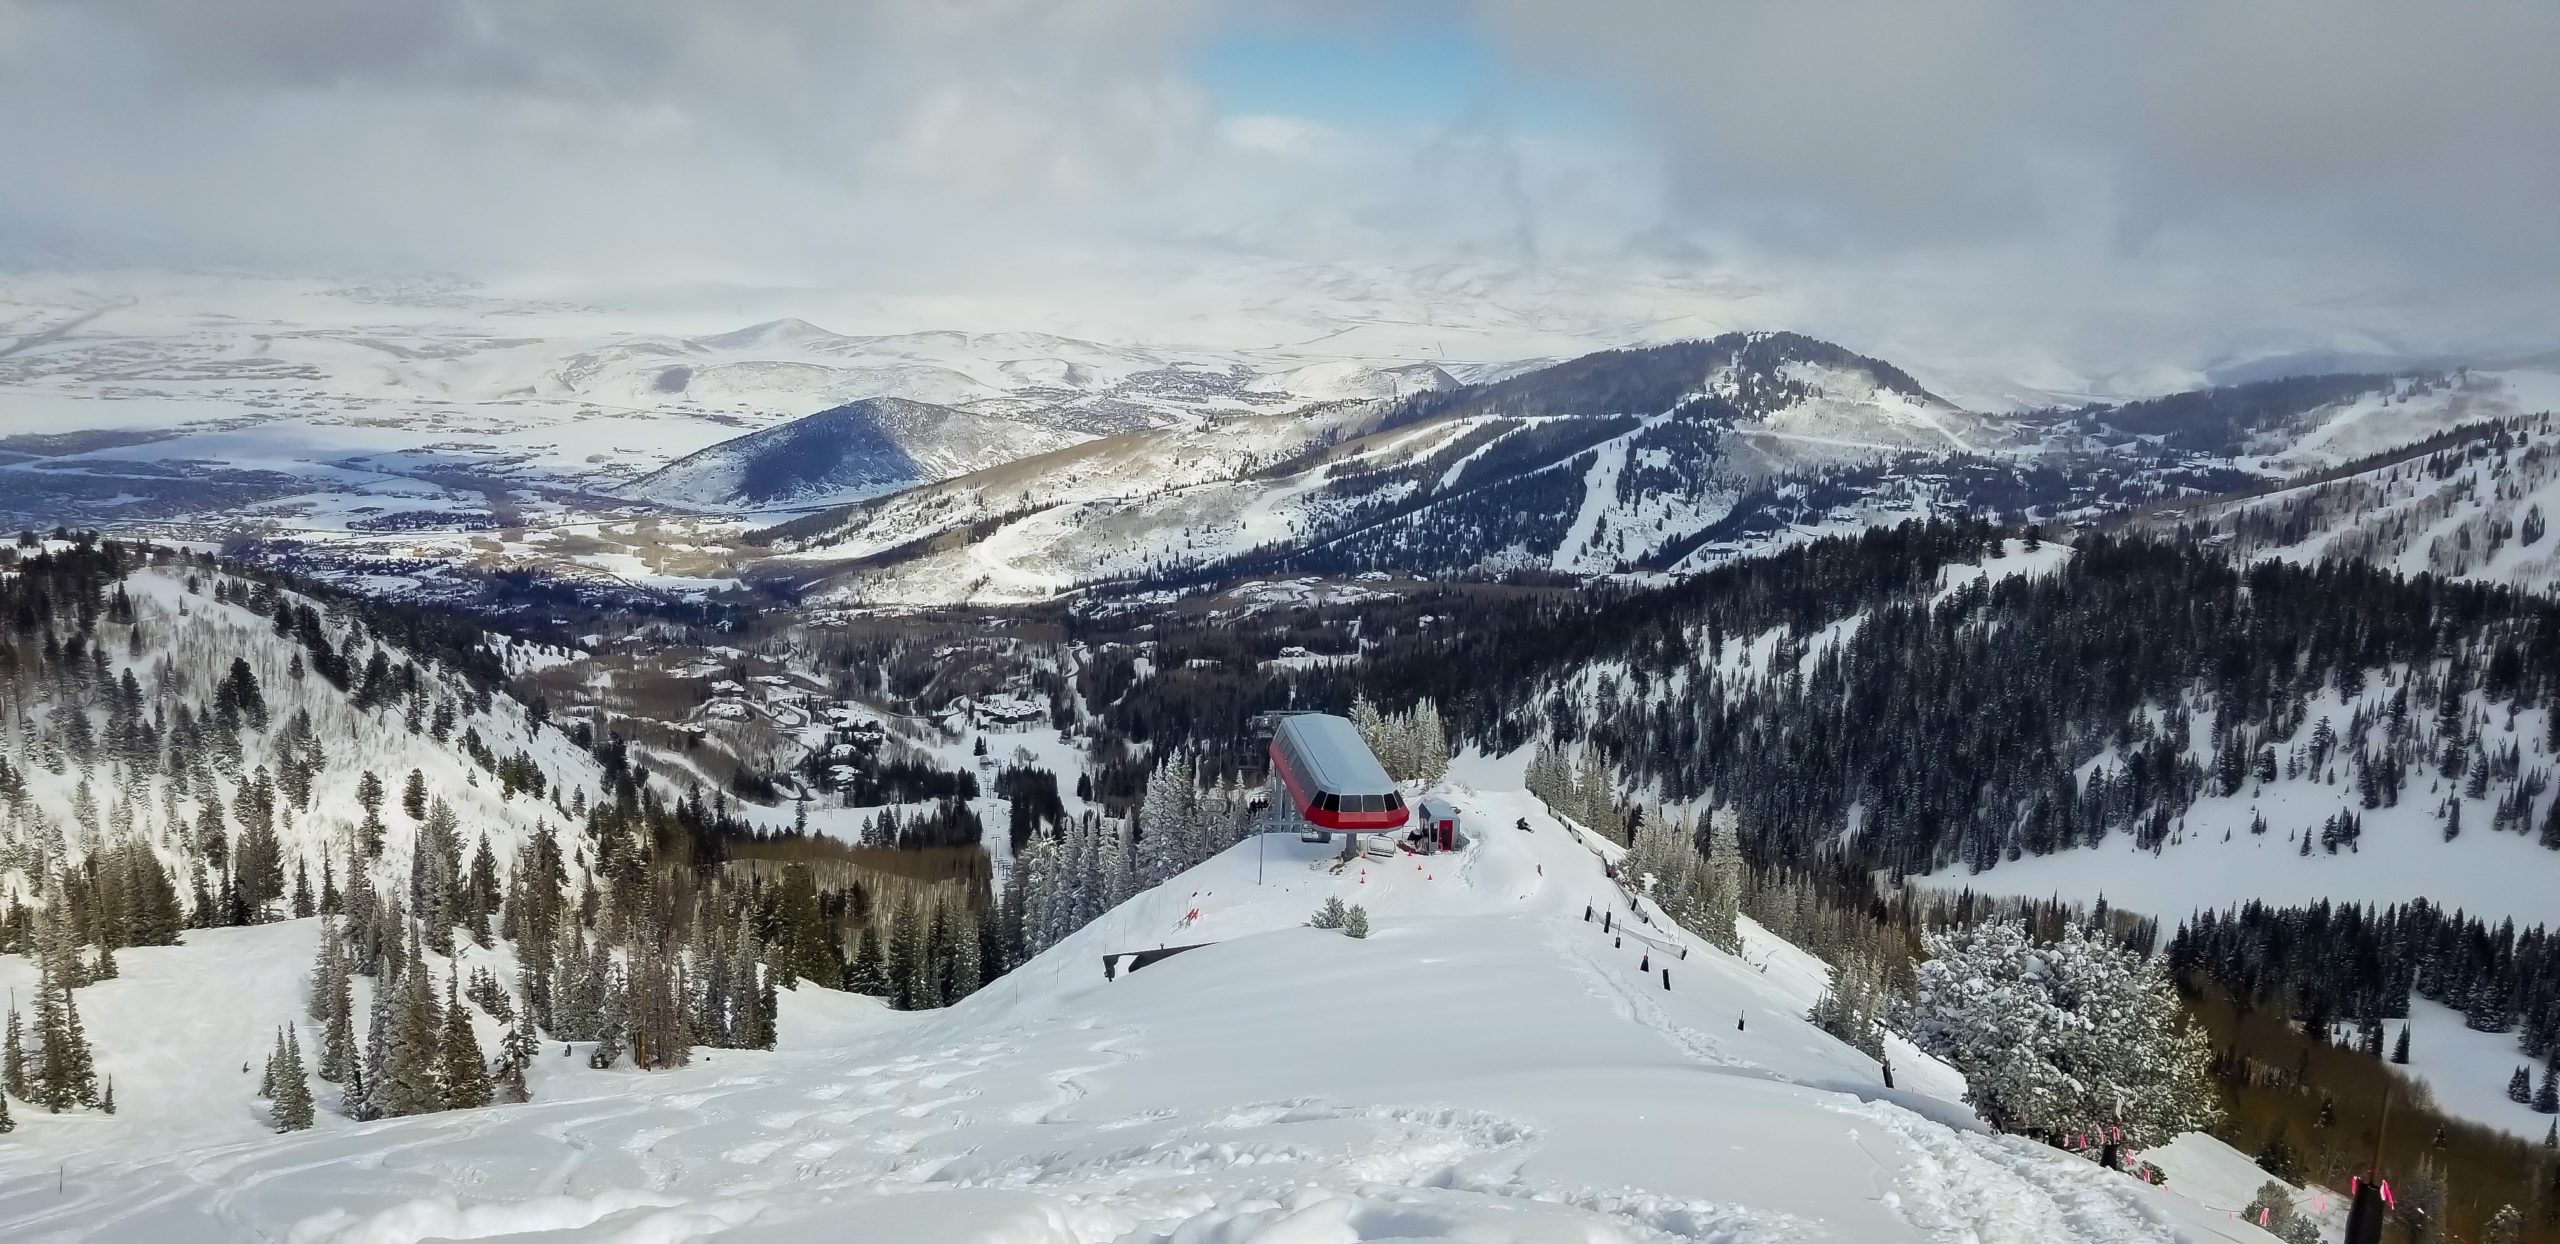 Airbnb Rentals in Park City